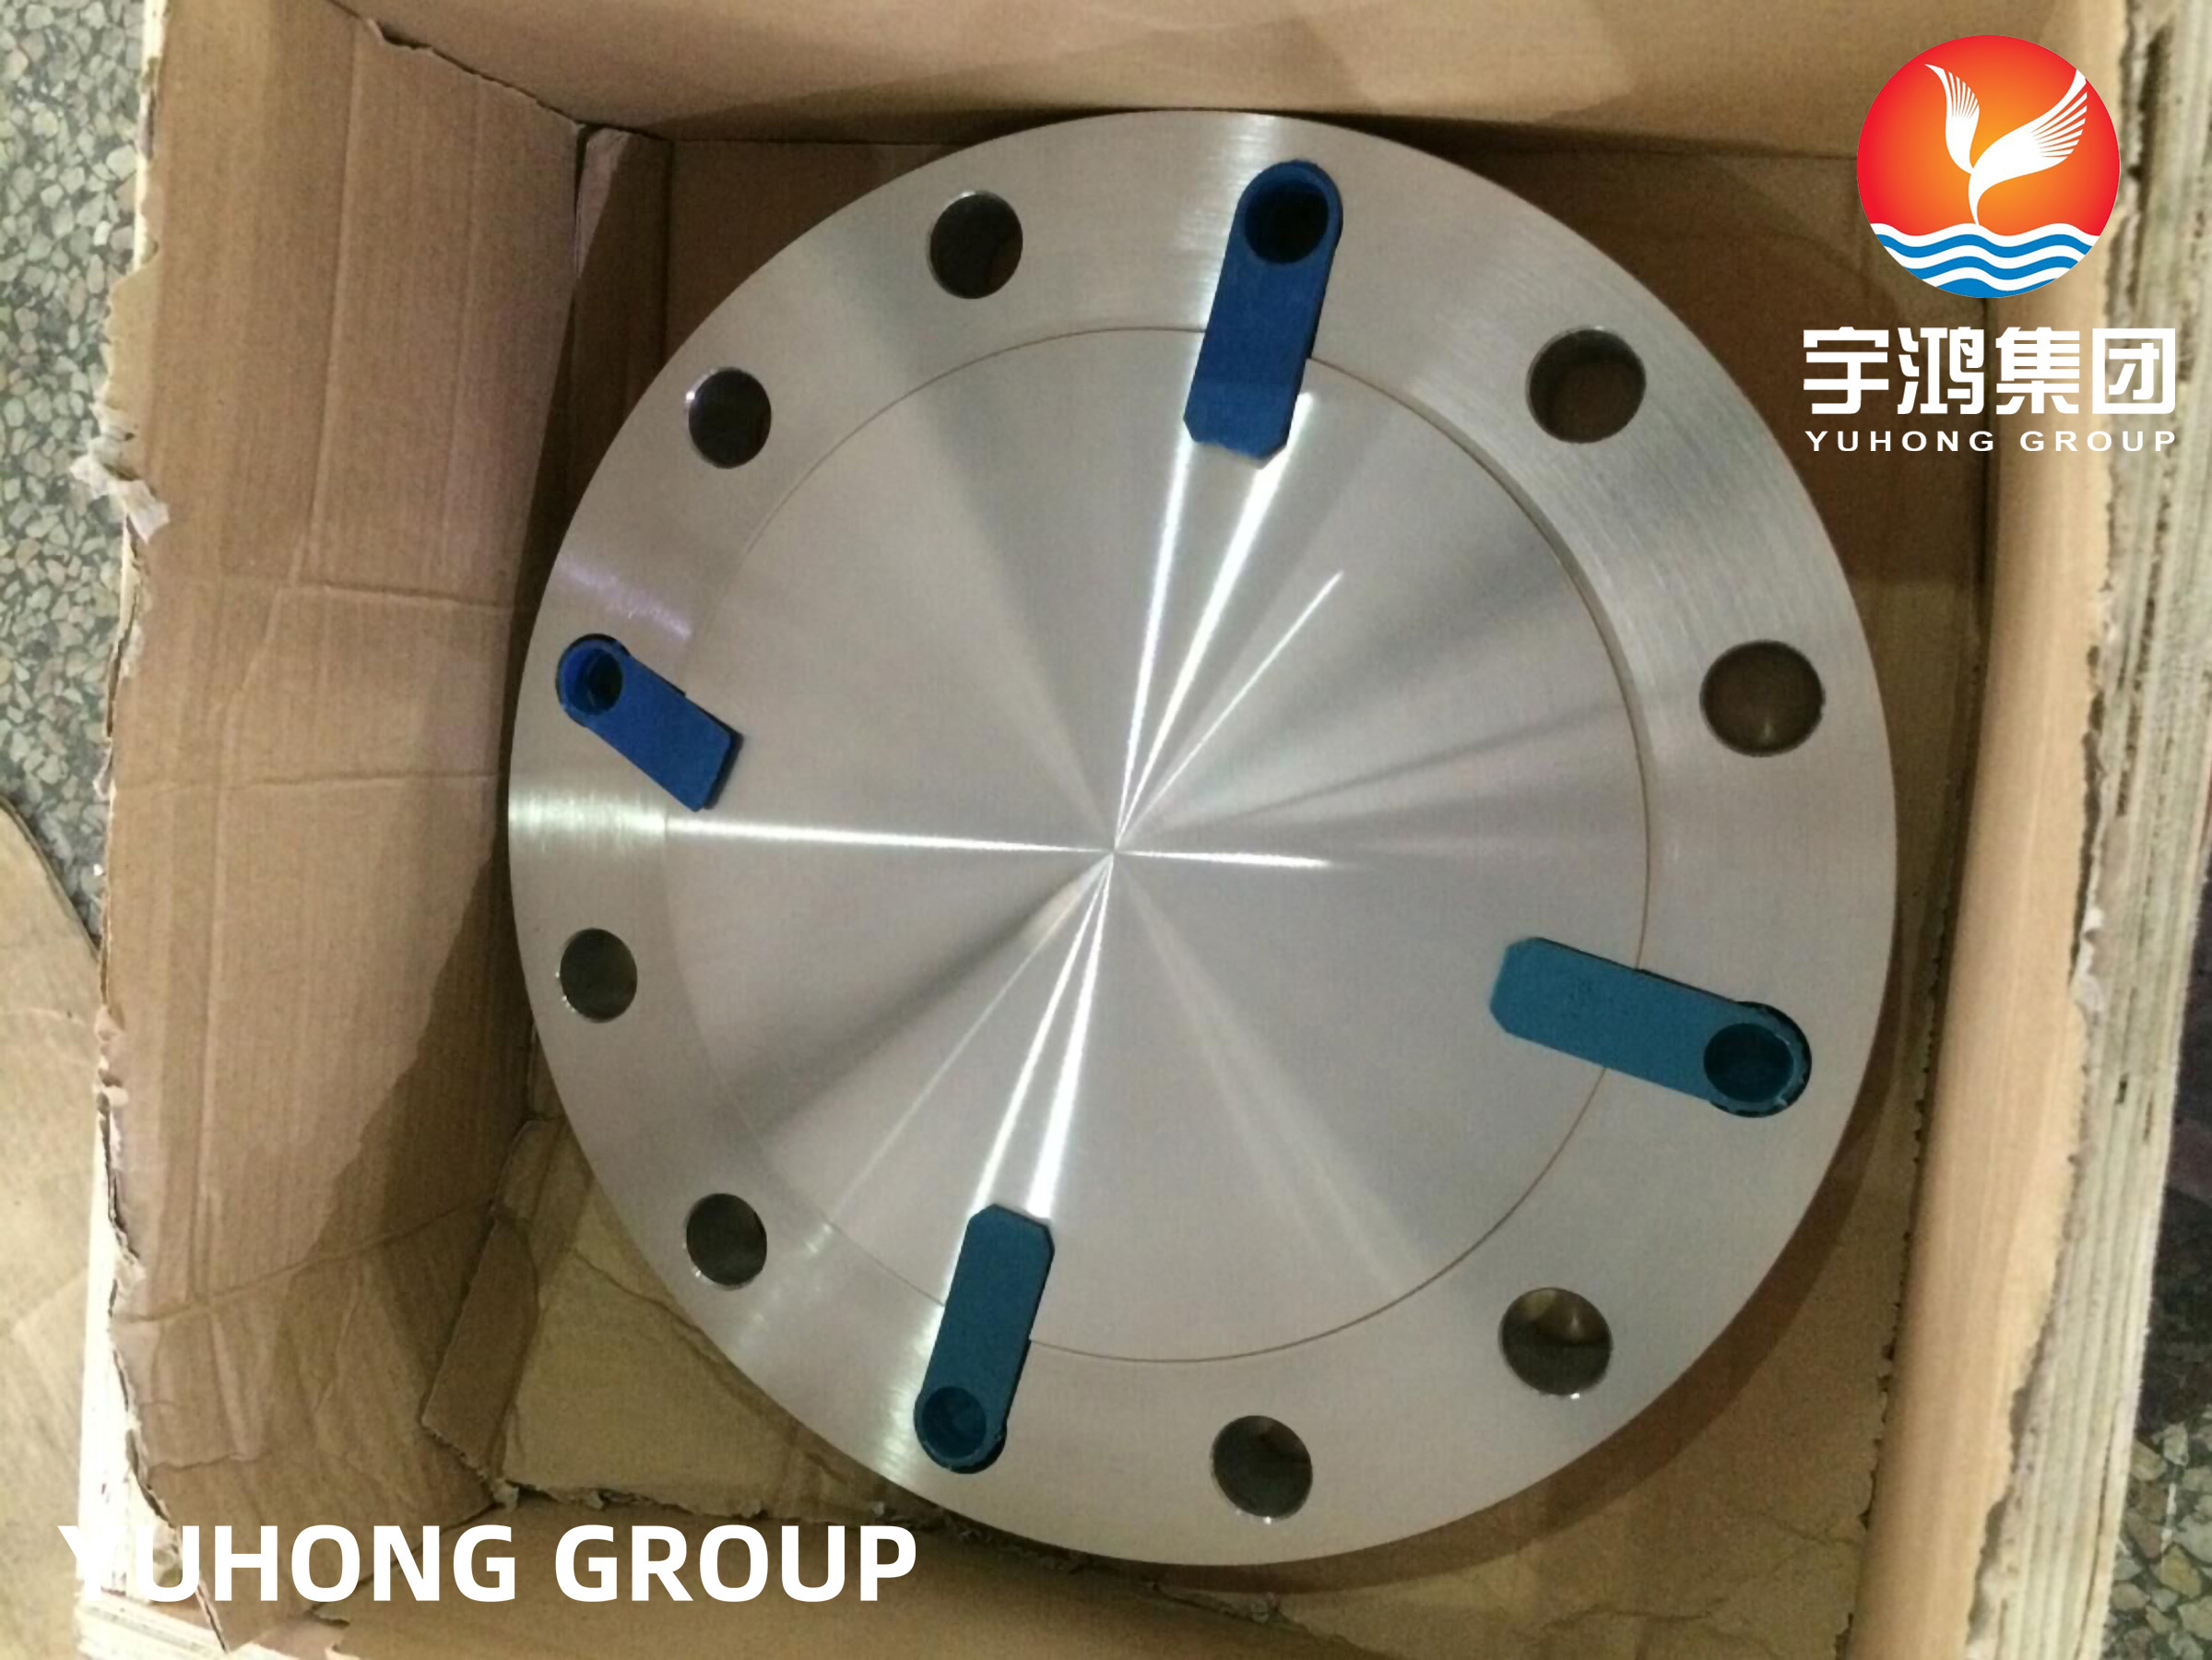 Quality SCH10S STAINLESS STEEL FORGED FLANGE ASTM A182 F317 A304 317L-S 1.4449 for sale